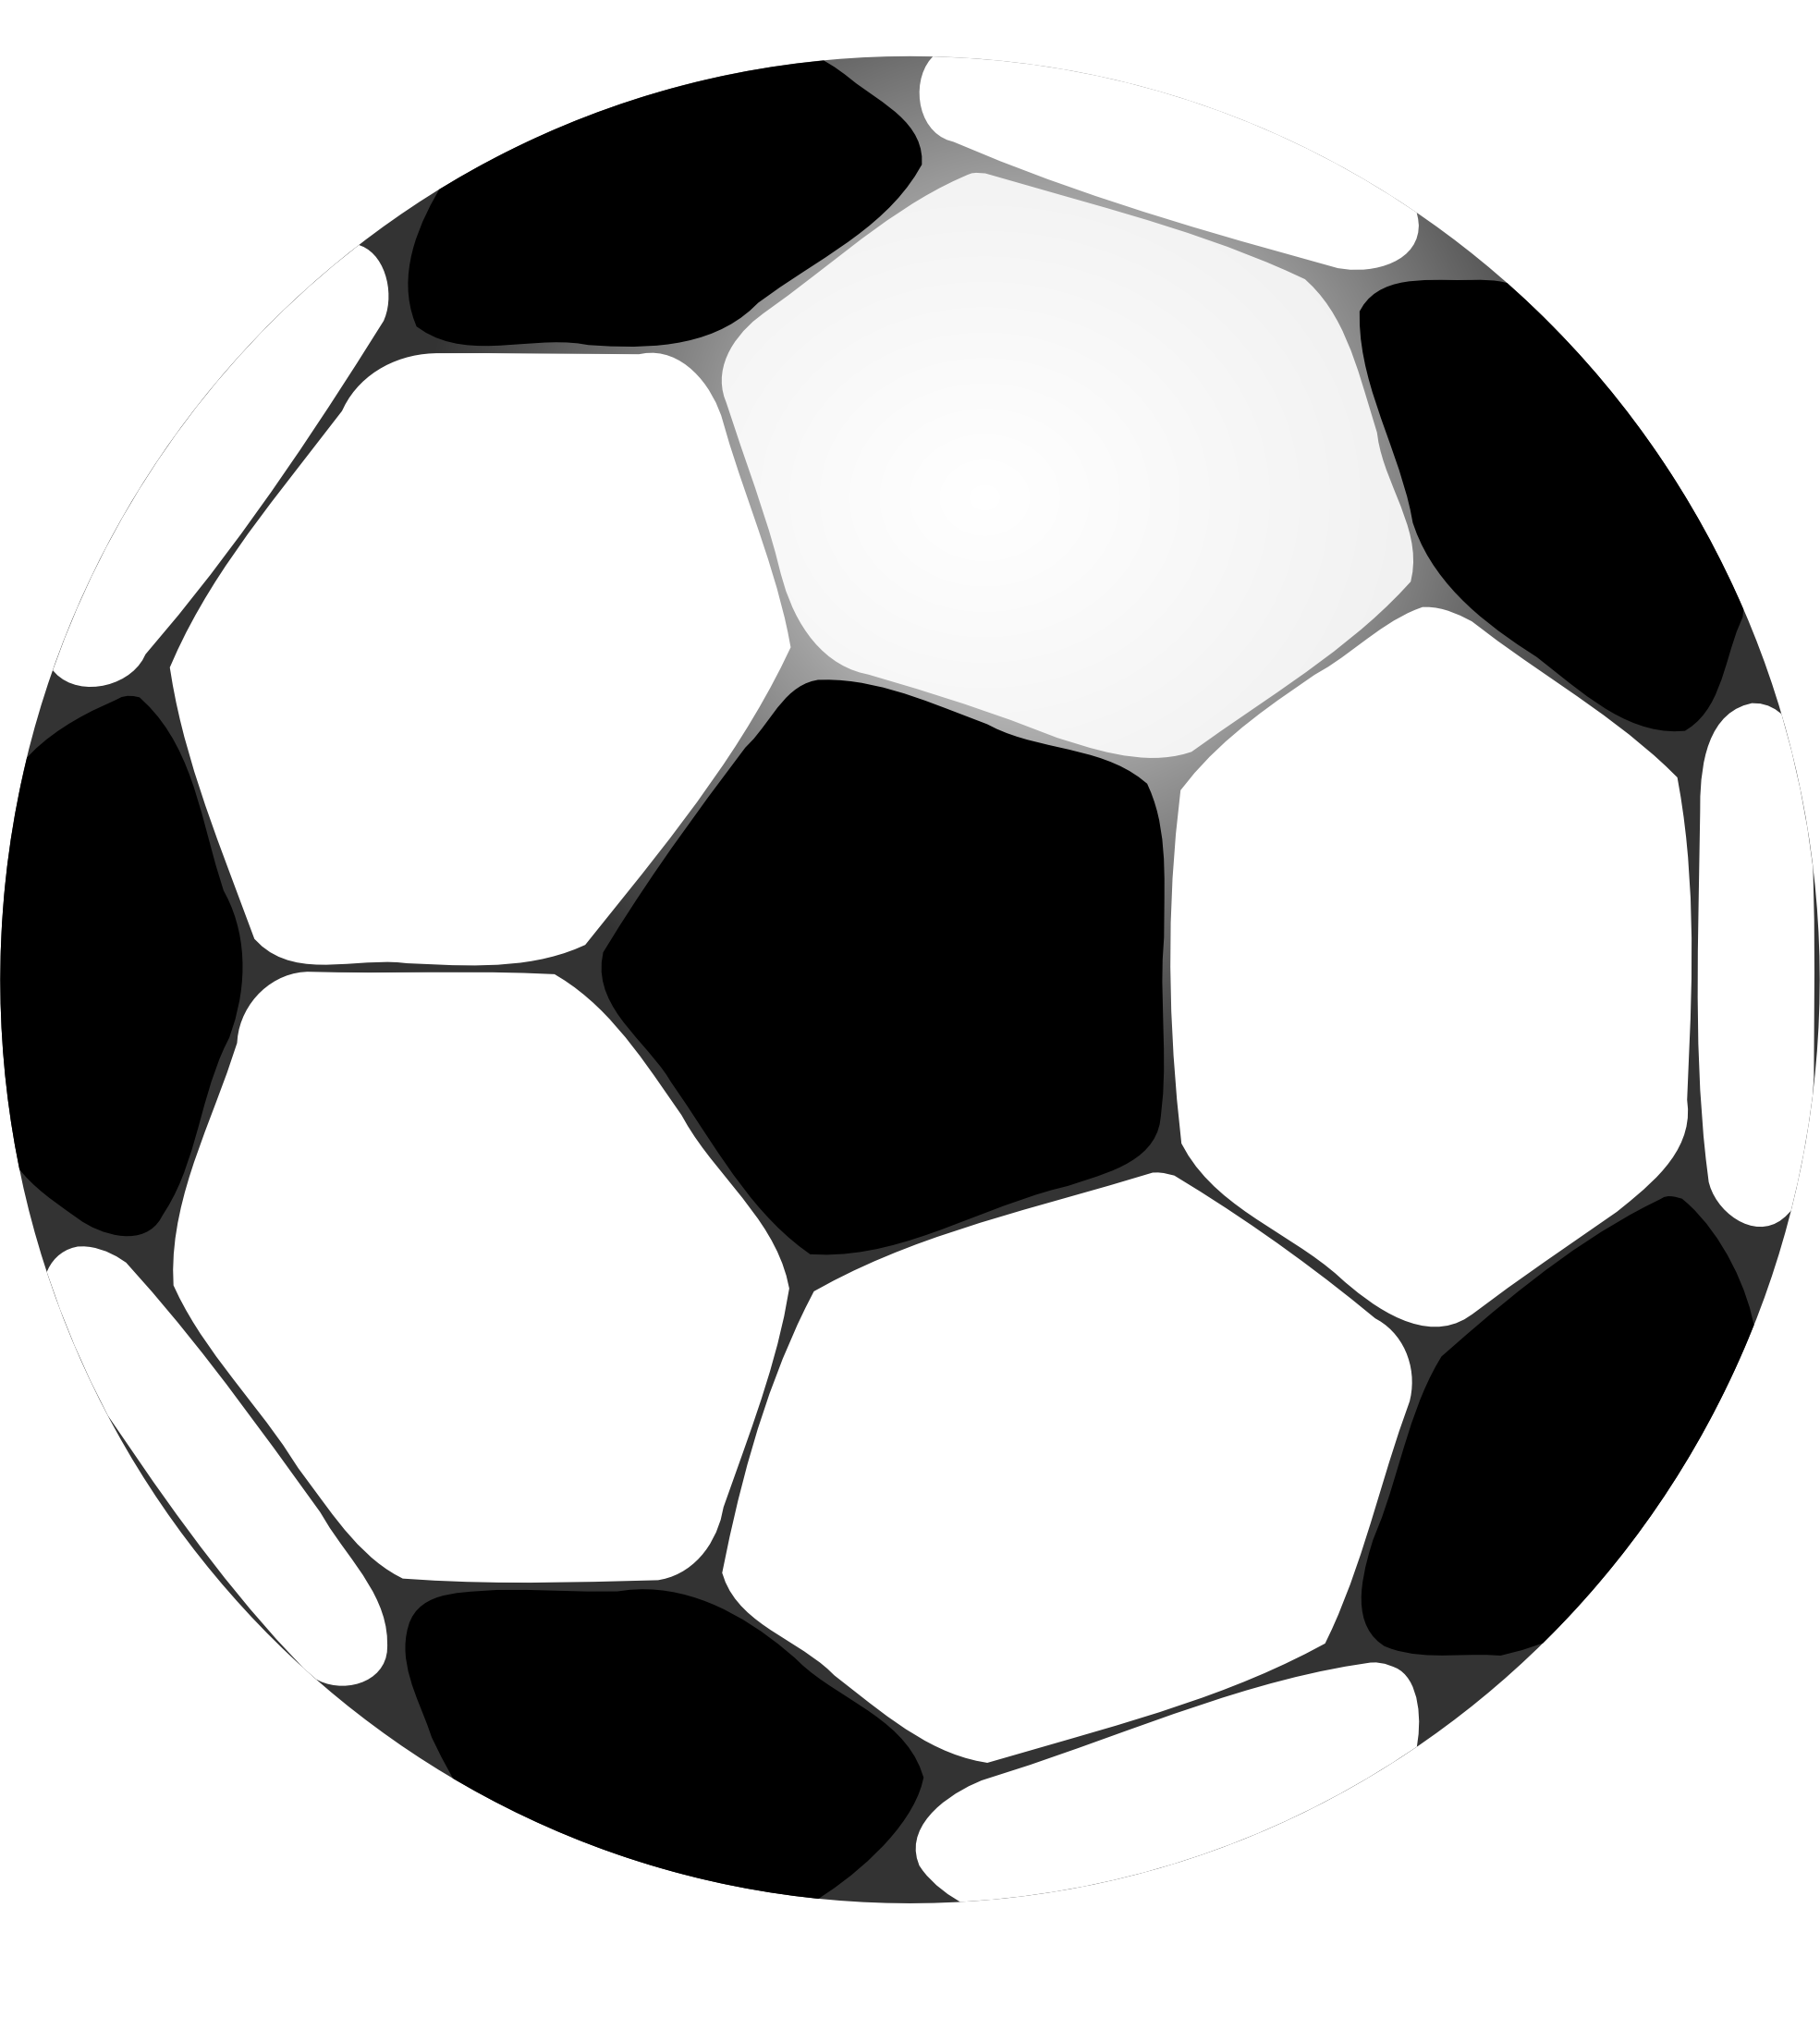 Soccer ball clip art free large images 4